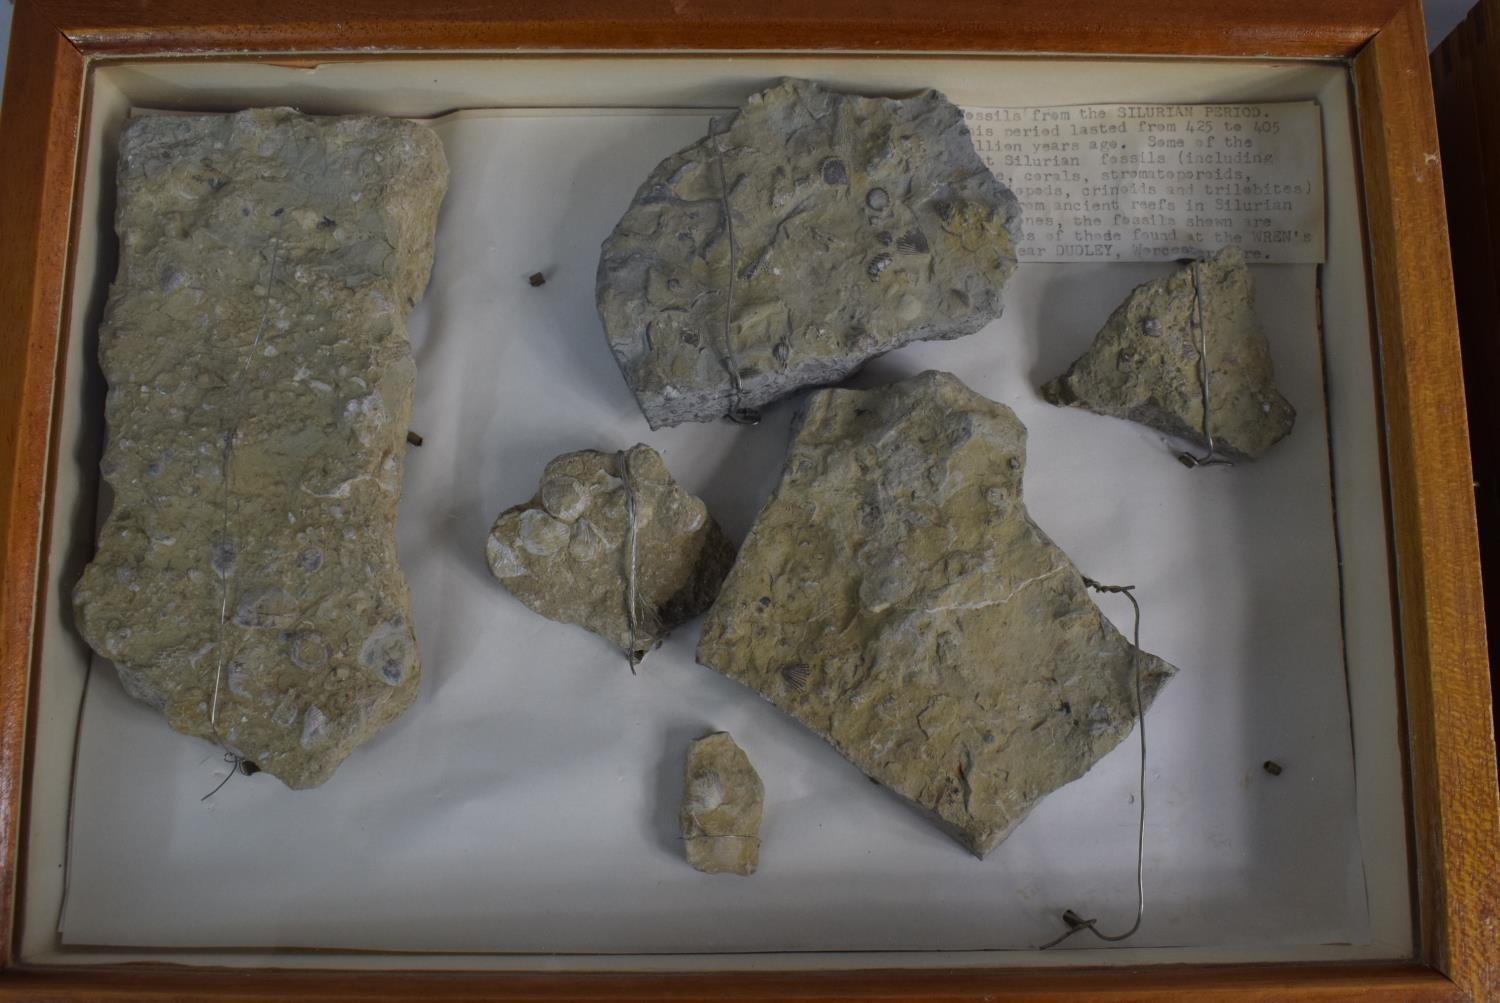 A Cased Table Top Pair of Display Cabinets Containing Fossils From the Silurian Period. Each 35x25. - Image 2 of 3